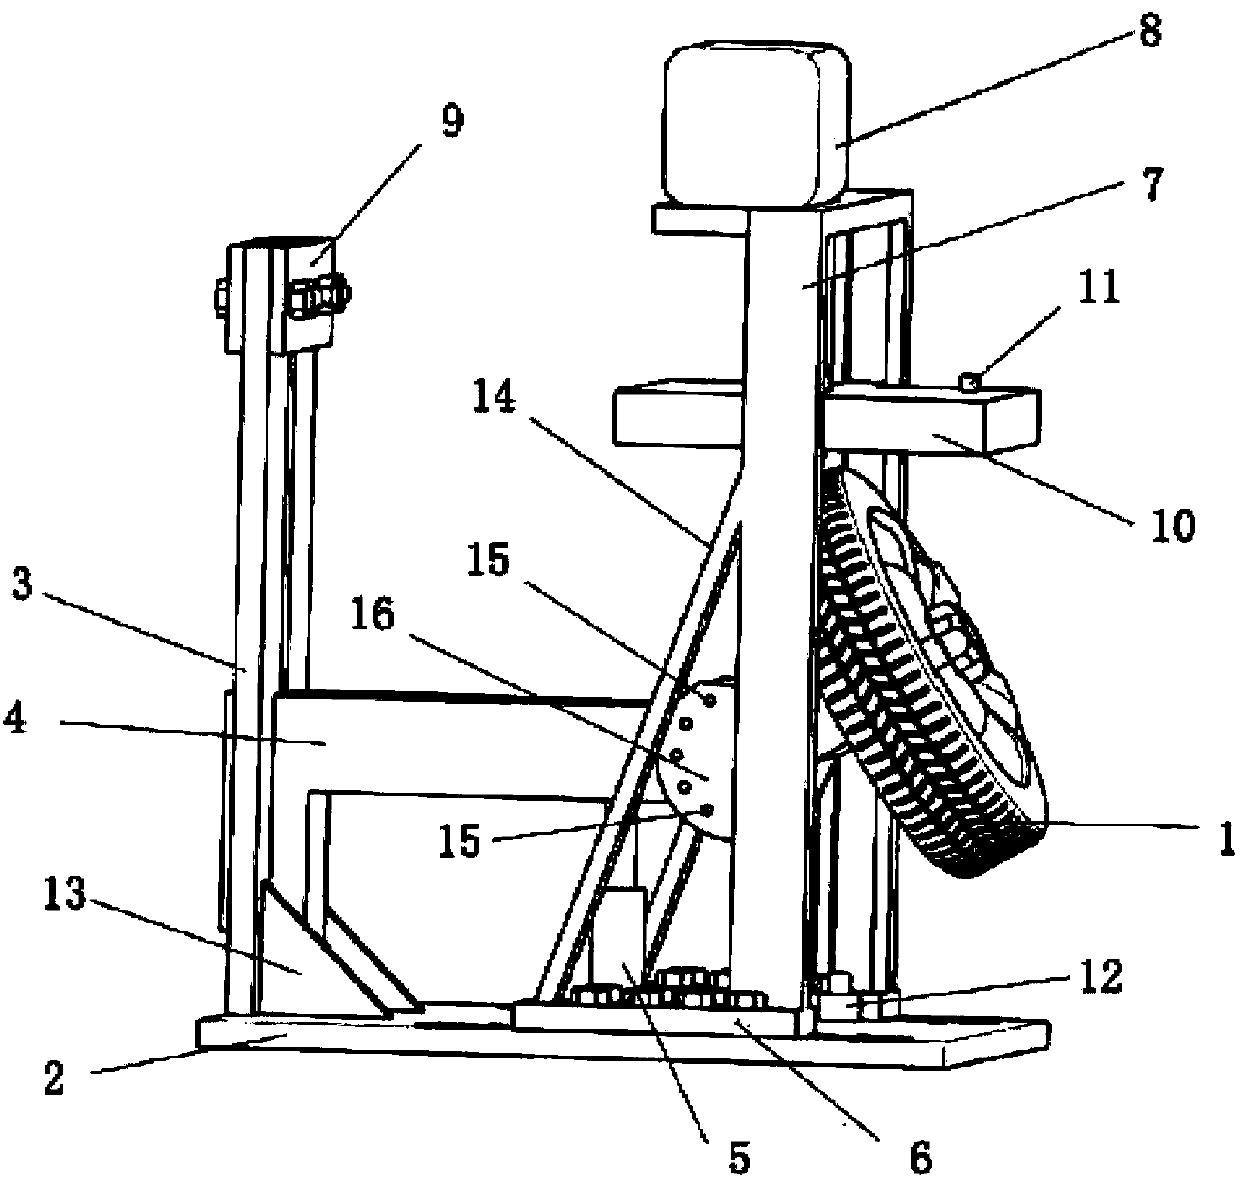 Multi-angle dynamic stiffness experimental device for tire